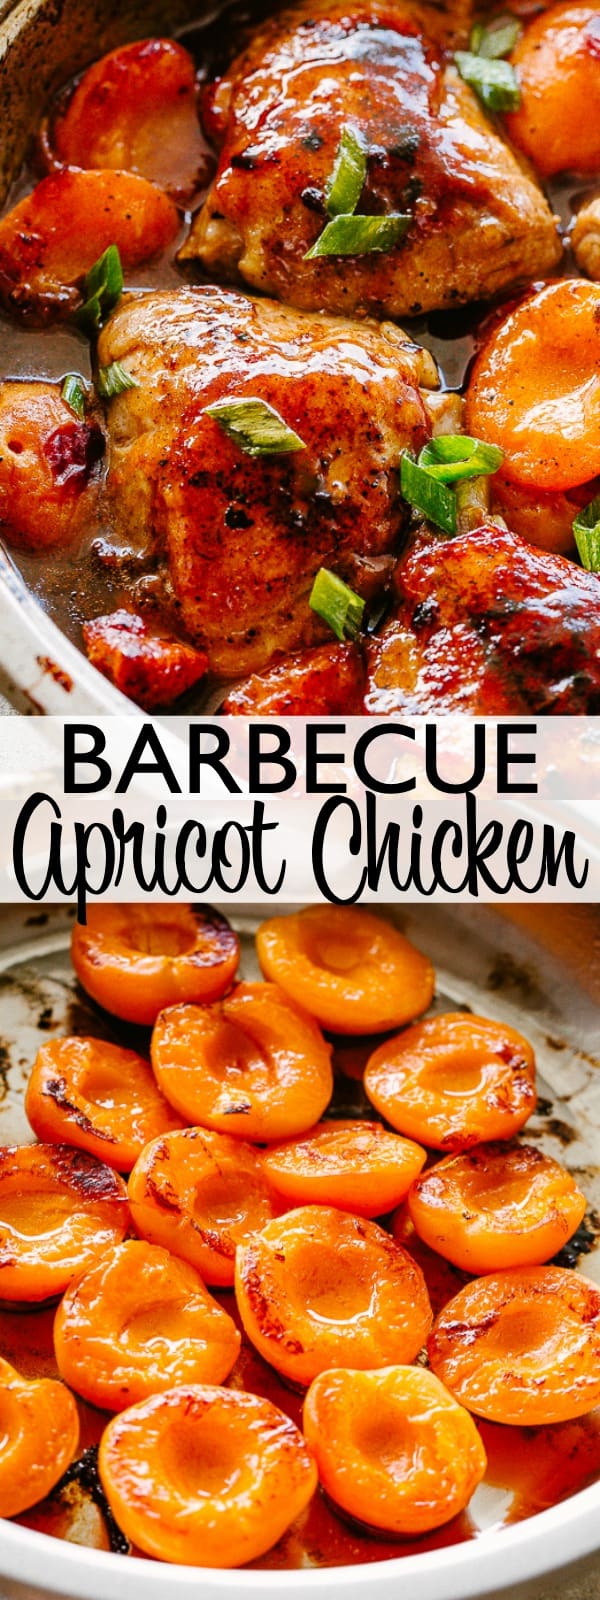 Barbecue Apricot Chicken - Diethood